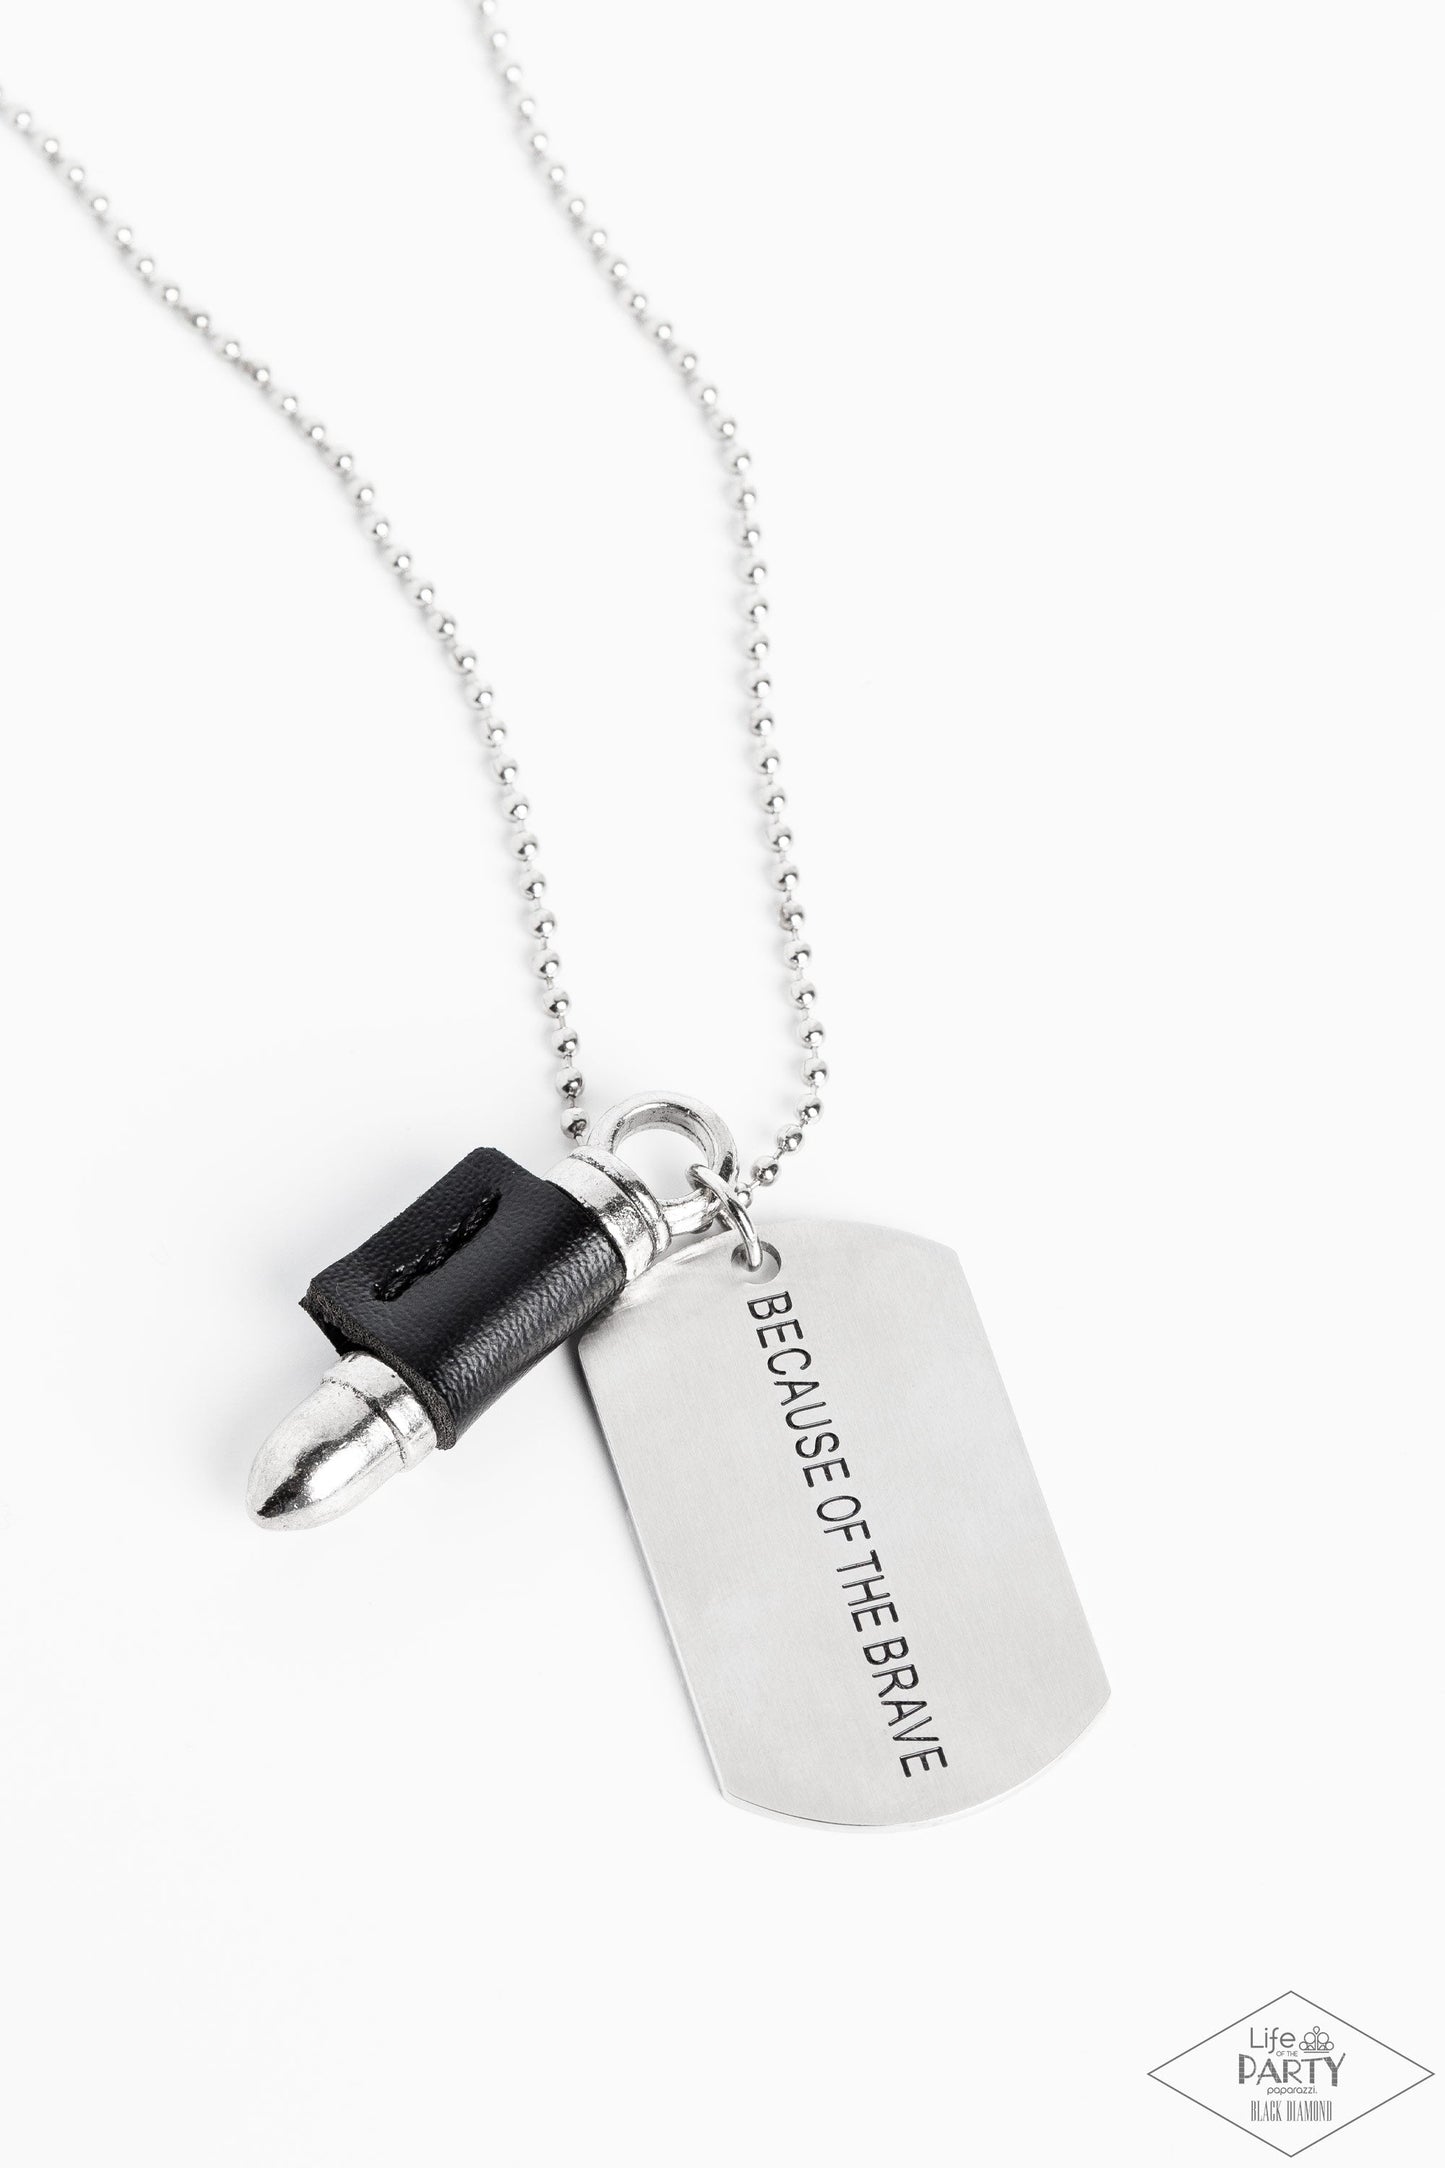 Proud Patriot - Black Leather, "Because of the Brave" Dog Tag & Silver Bullet Paparazzi Men's Necklace